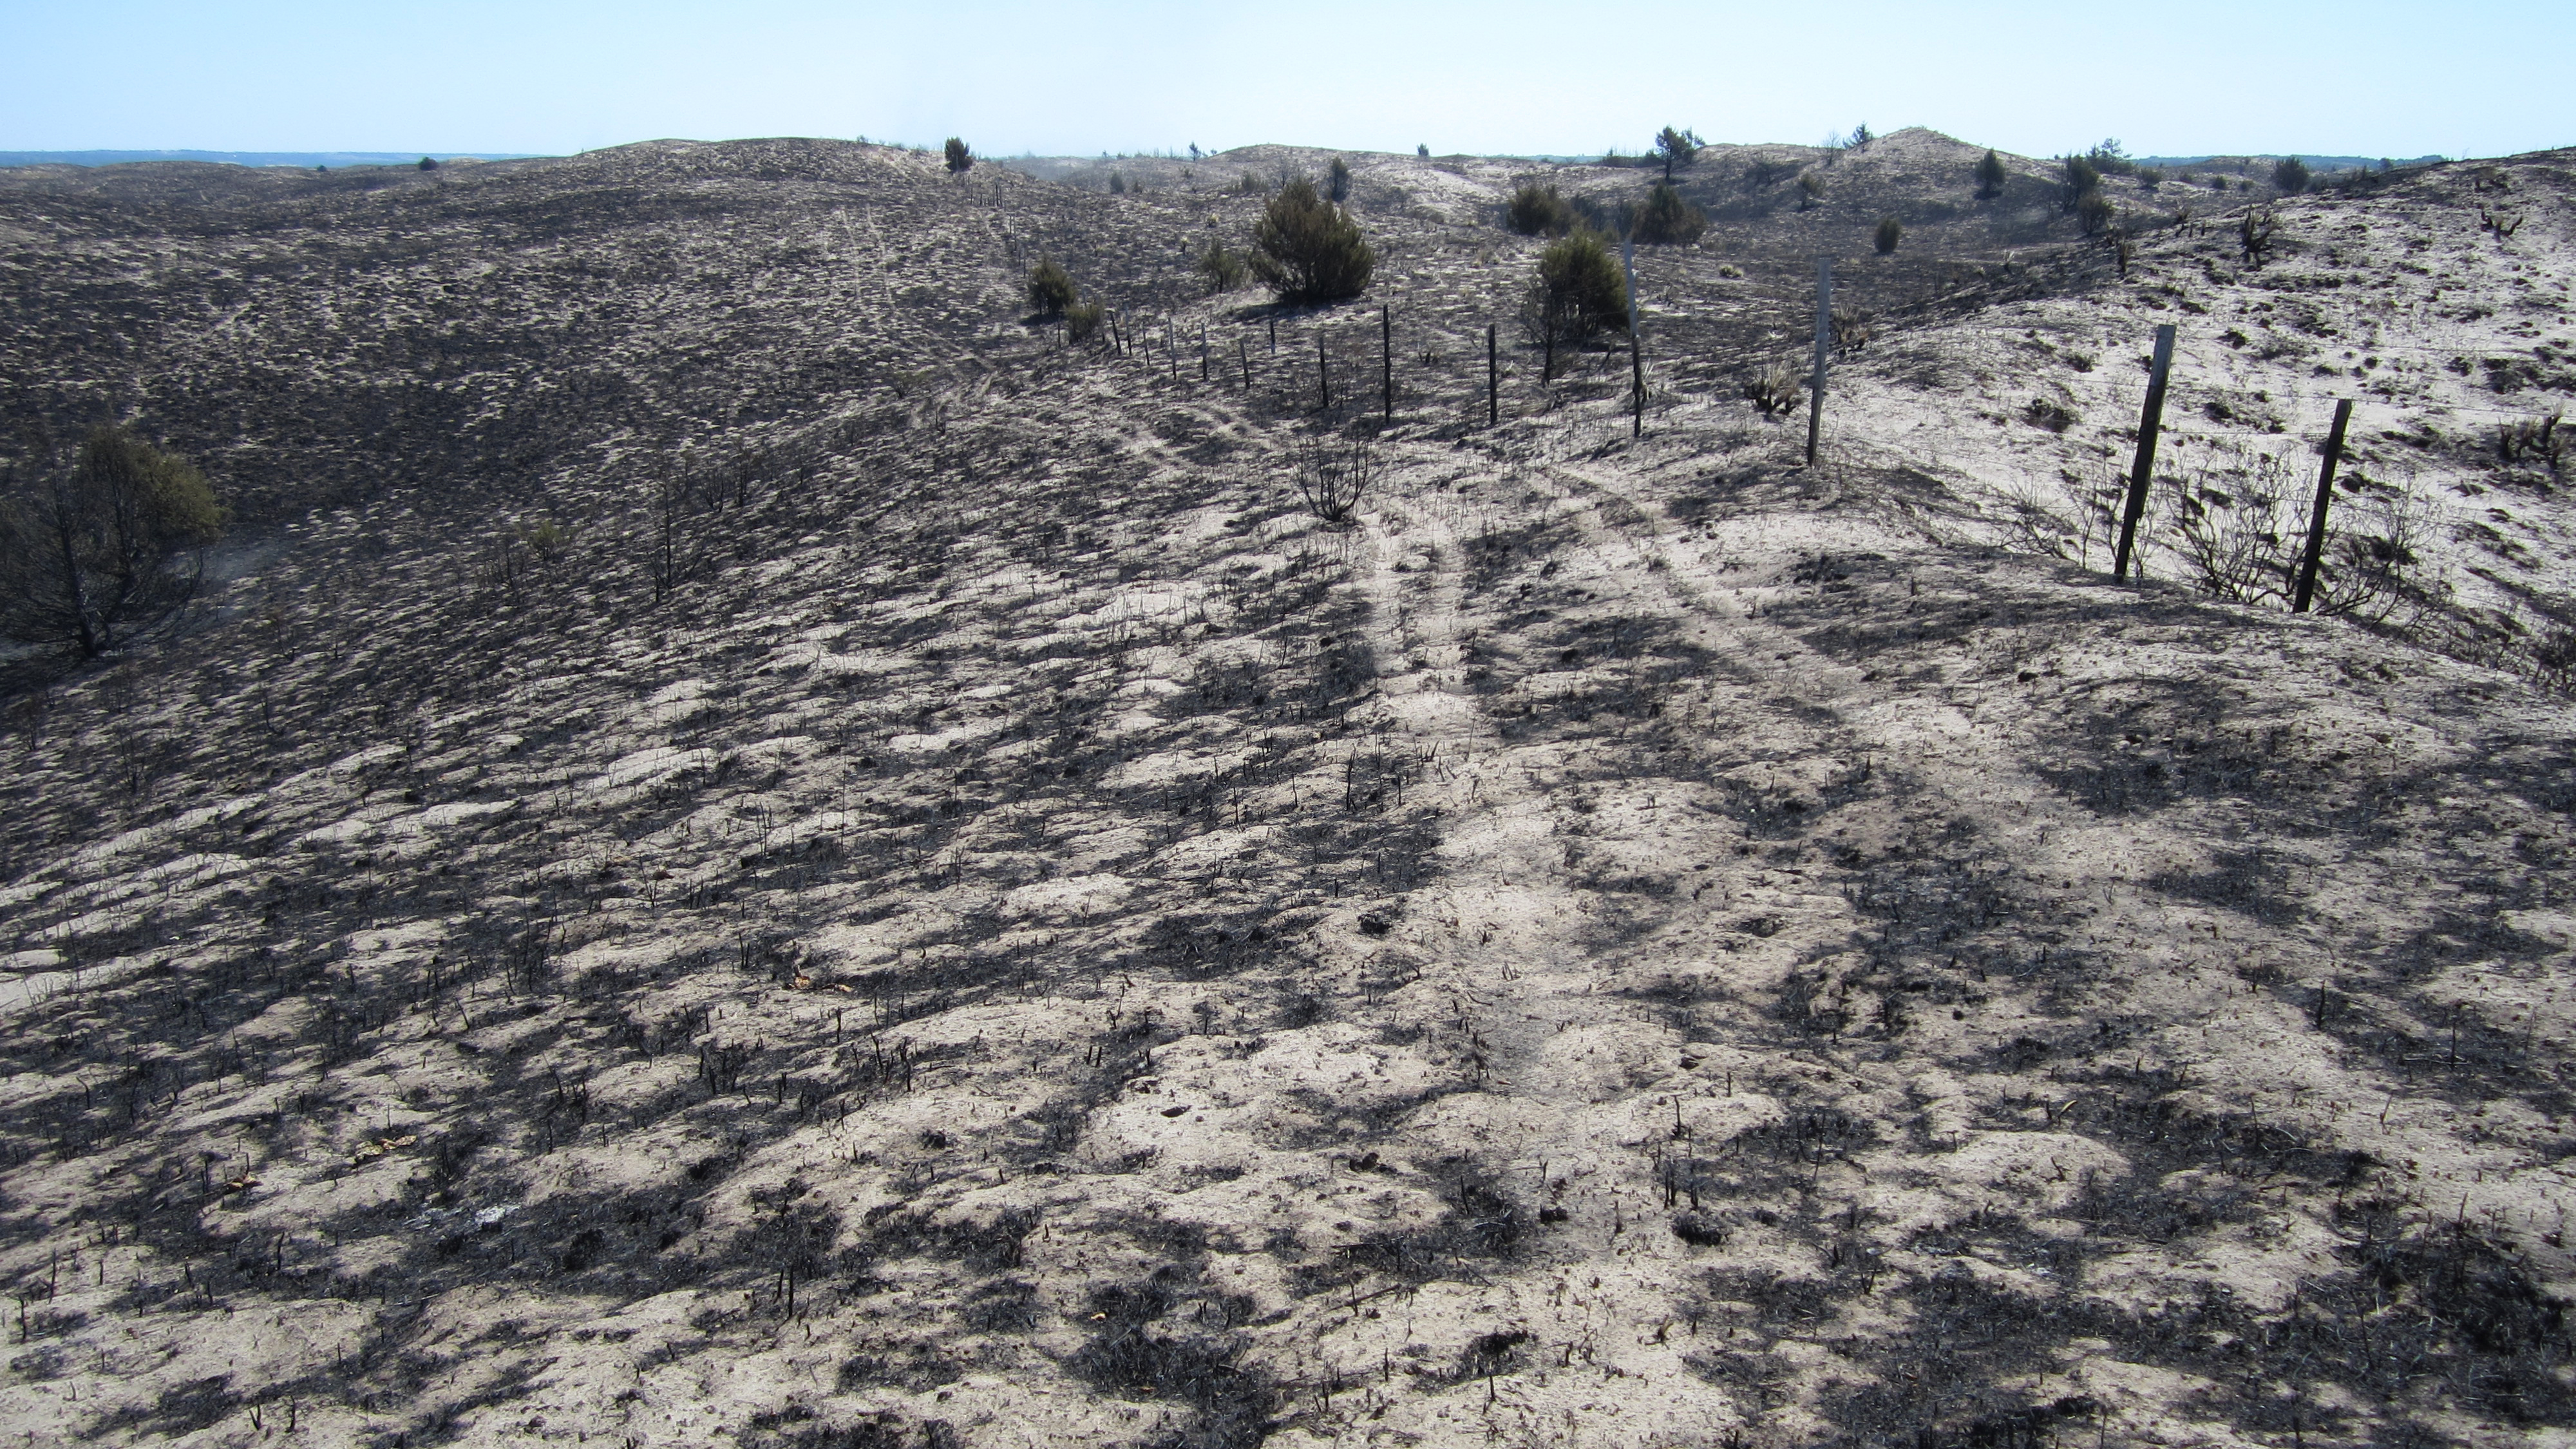 Sandhills grasslands are reduced to ash, days after a wildfire swept through the Niobrara Valley Preserve in July 2012.  |  Chris Helzer, The Nature Conservancy